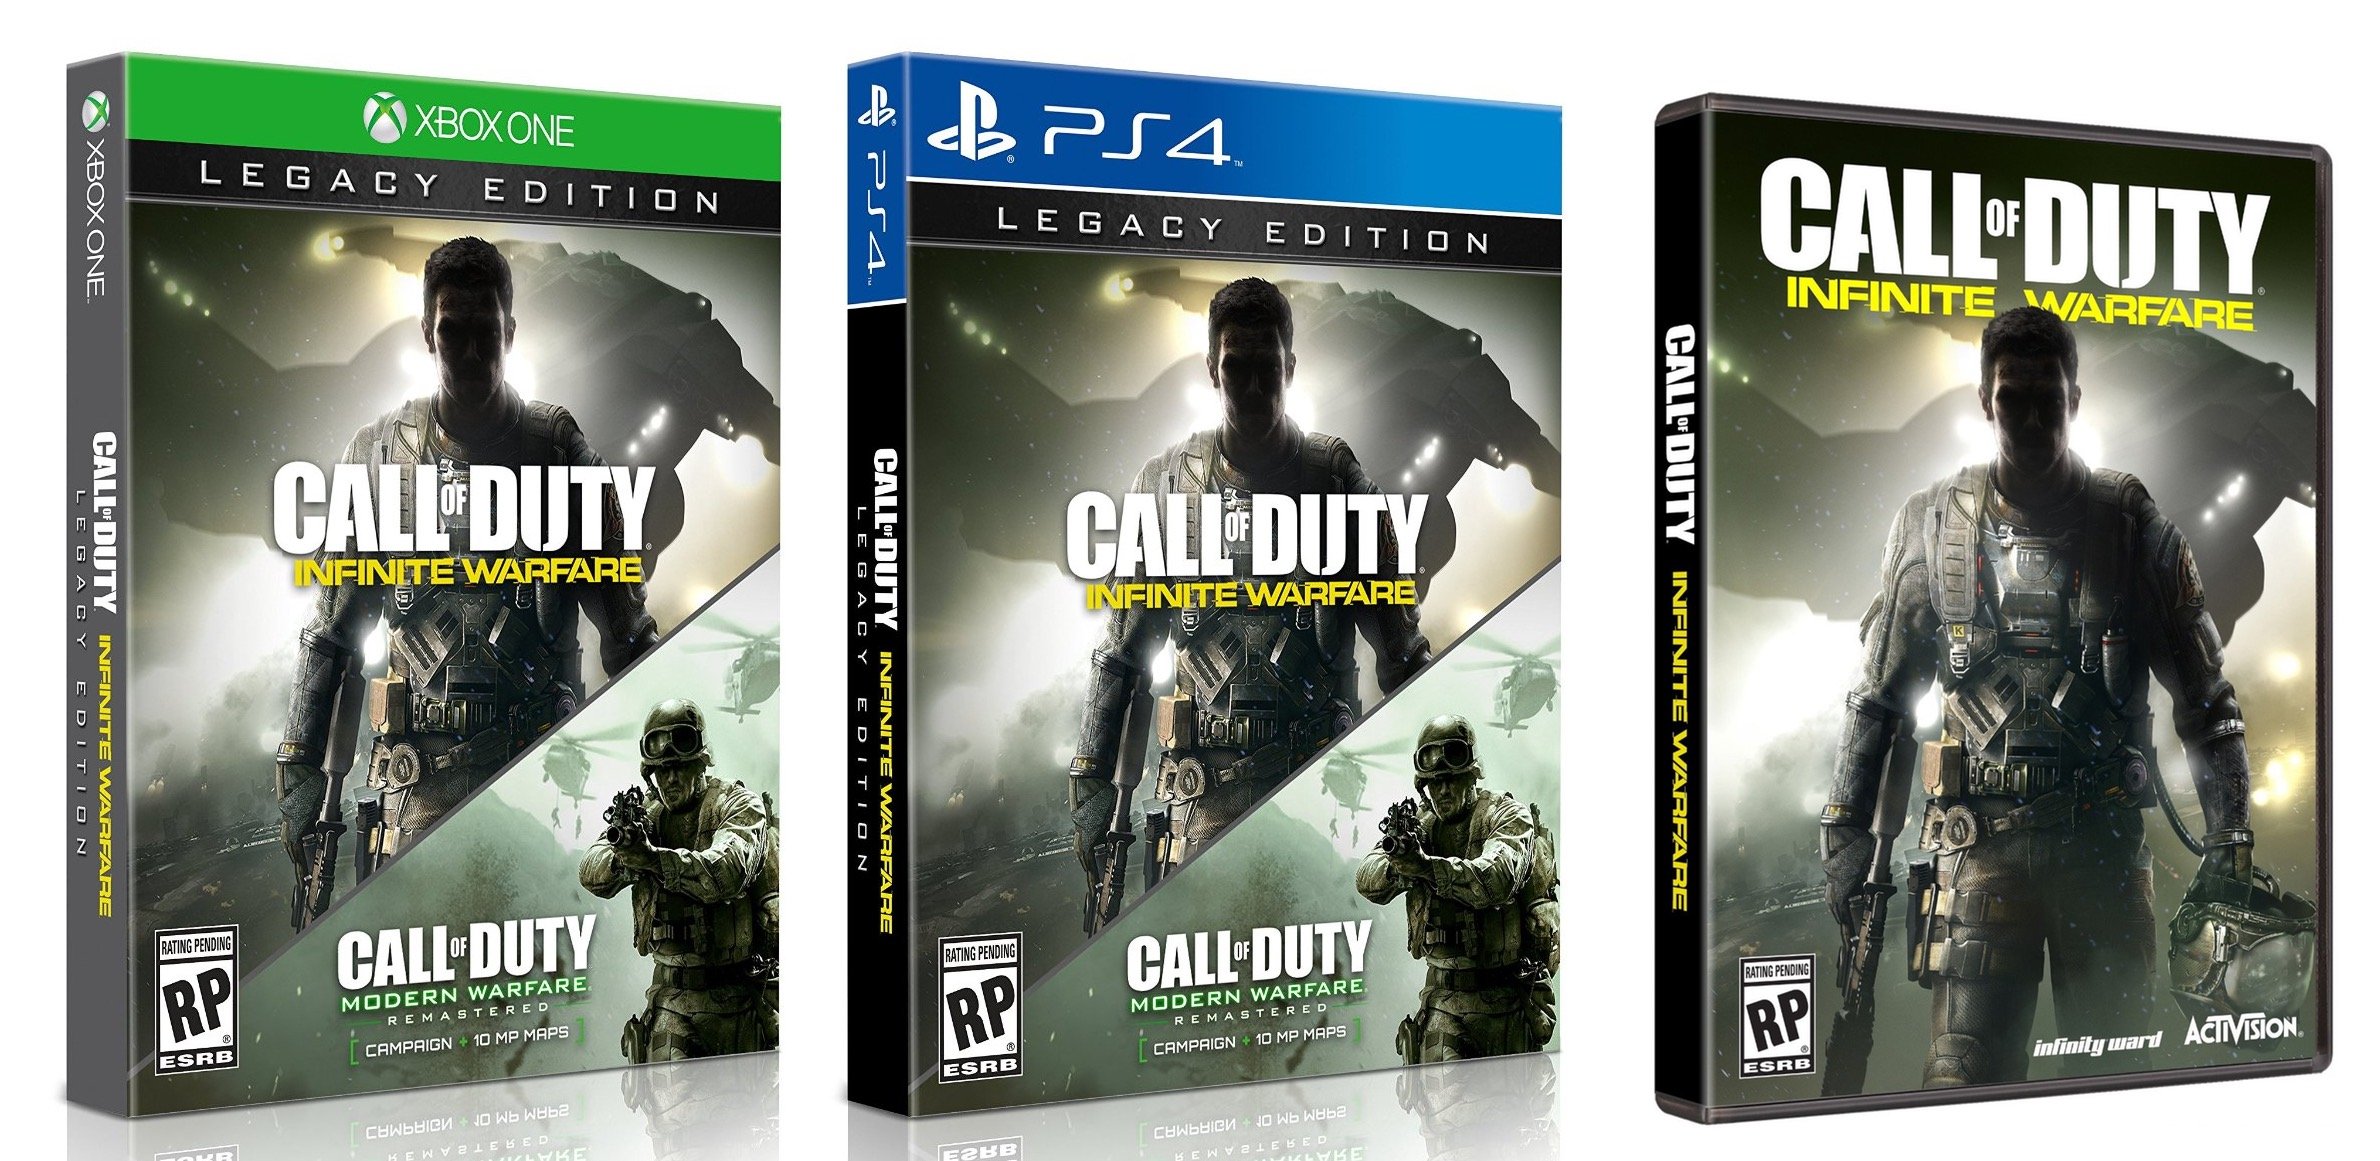 What you need to know about the Infinite Warfare release date.